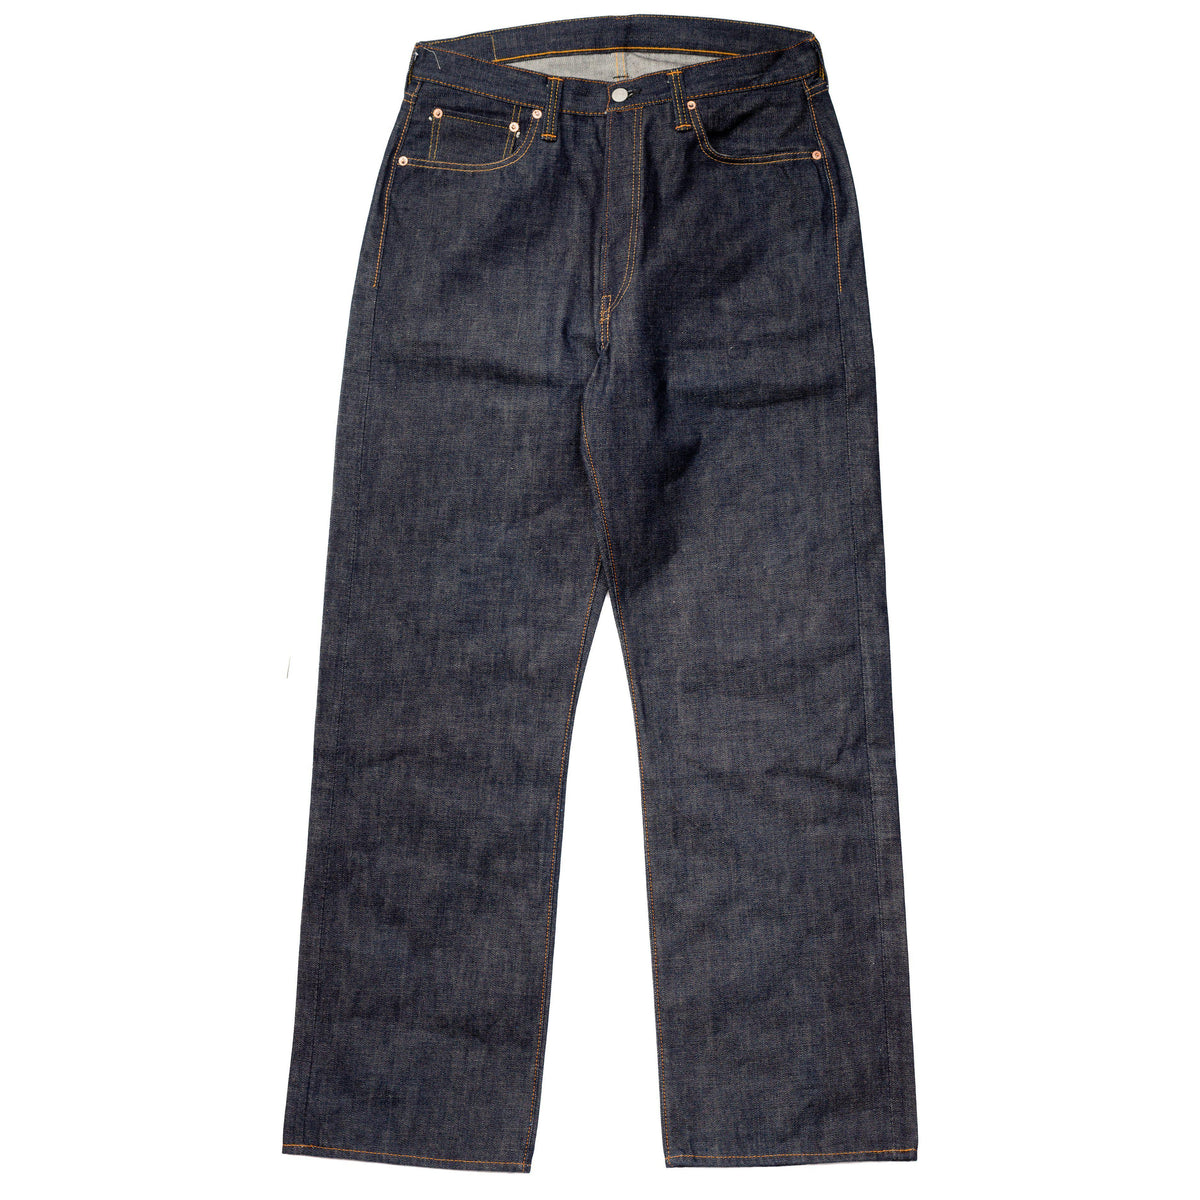 Full Count 0105 New Loose Straight Jean 13.7oz